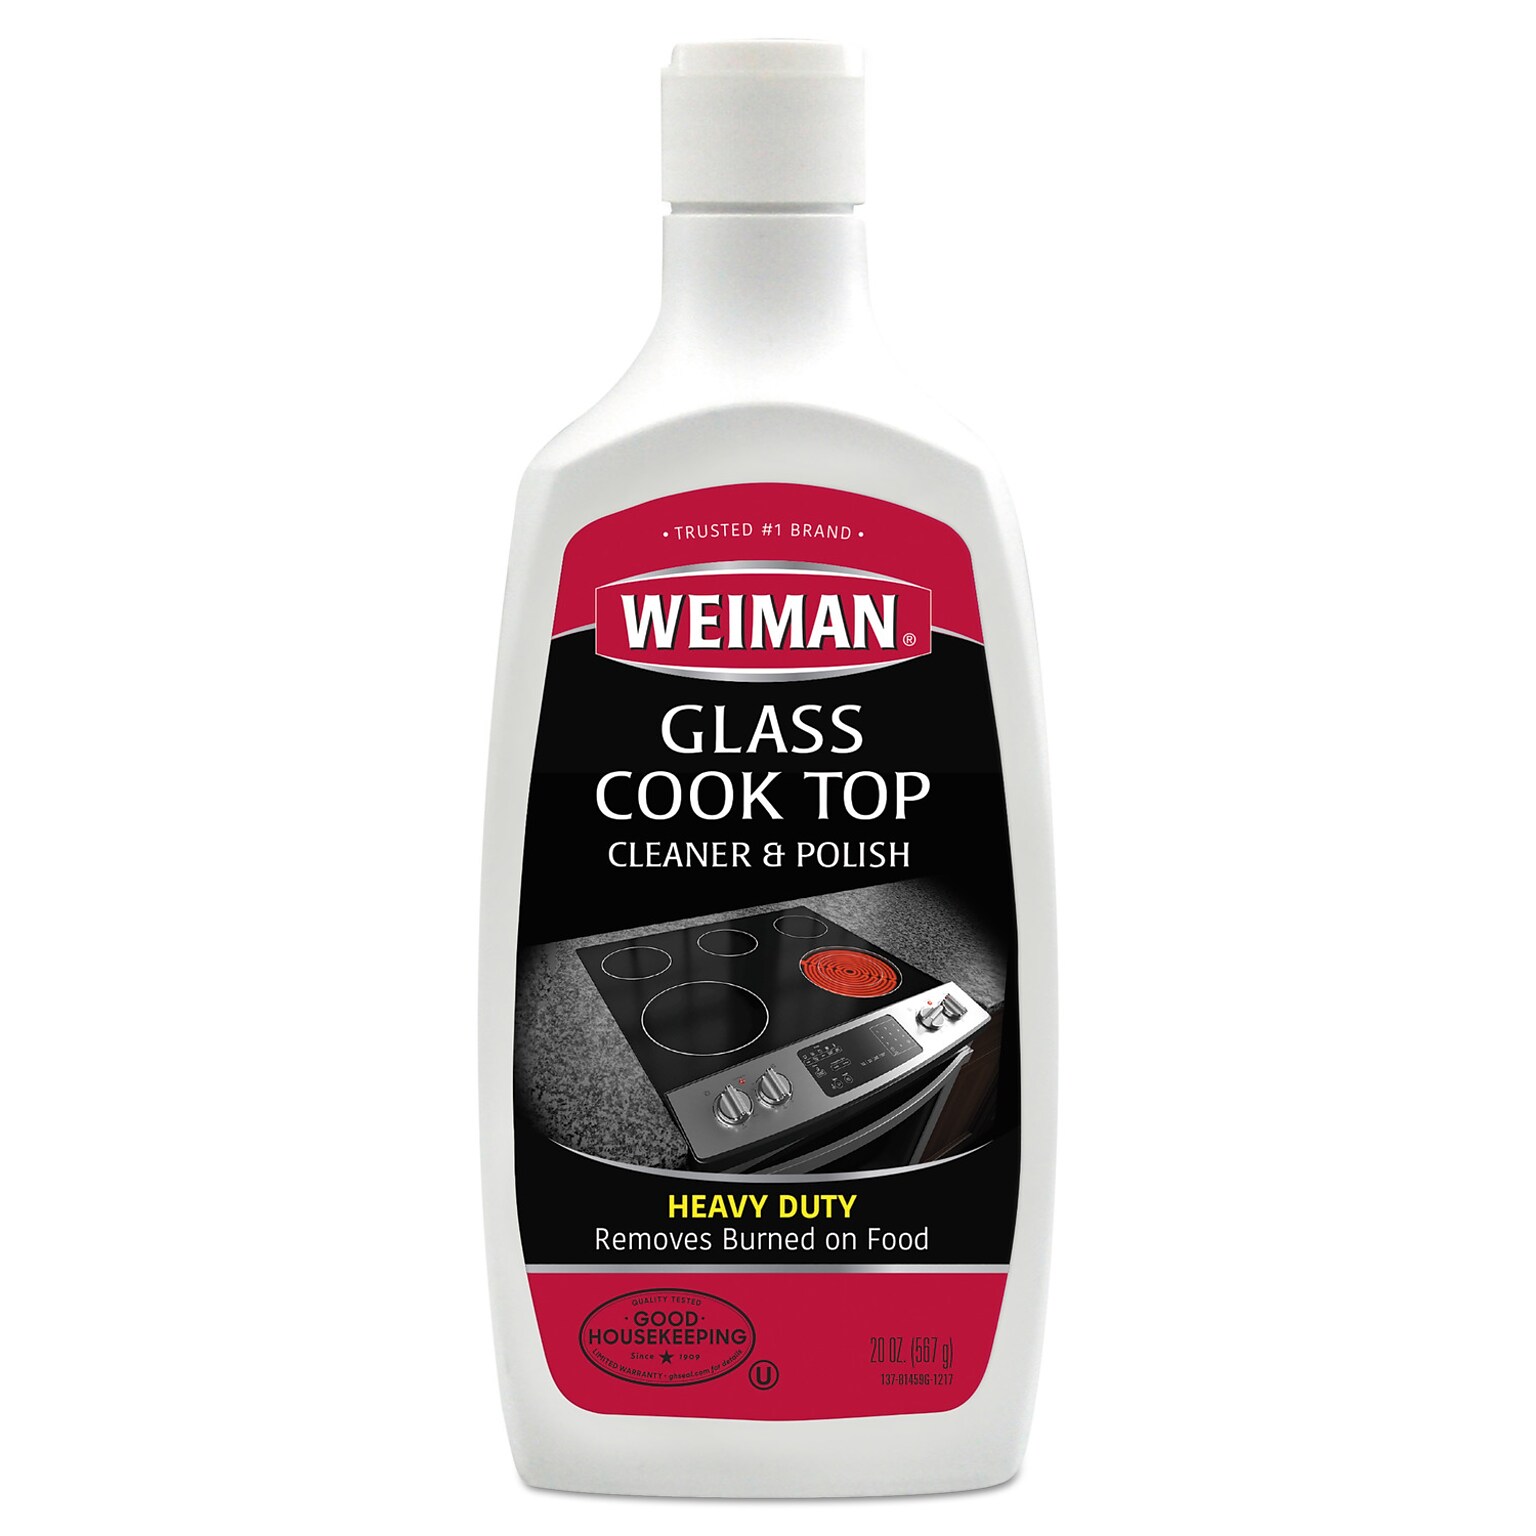 WEIMAN Glass Cook Top Cleaner and Polish, 20 oz Squeeze Bottle (DVO101102924)